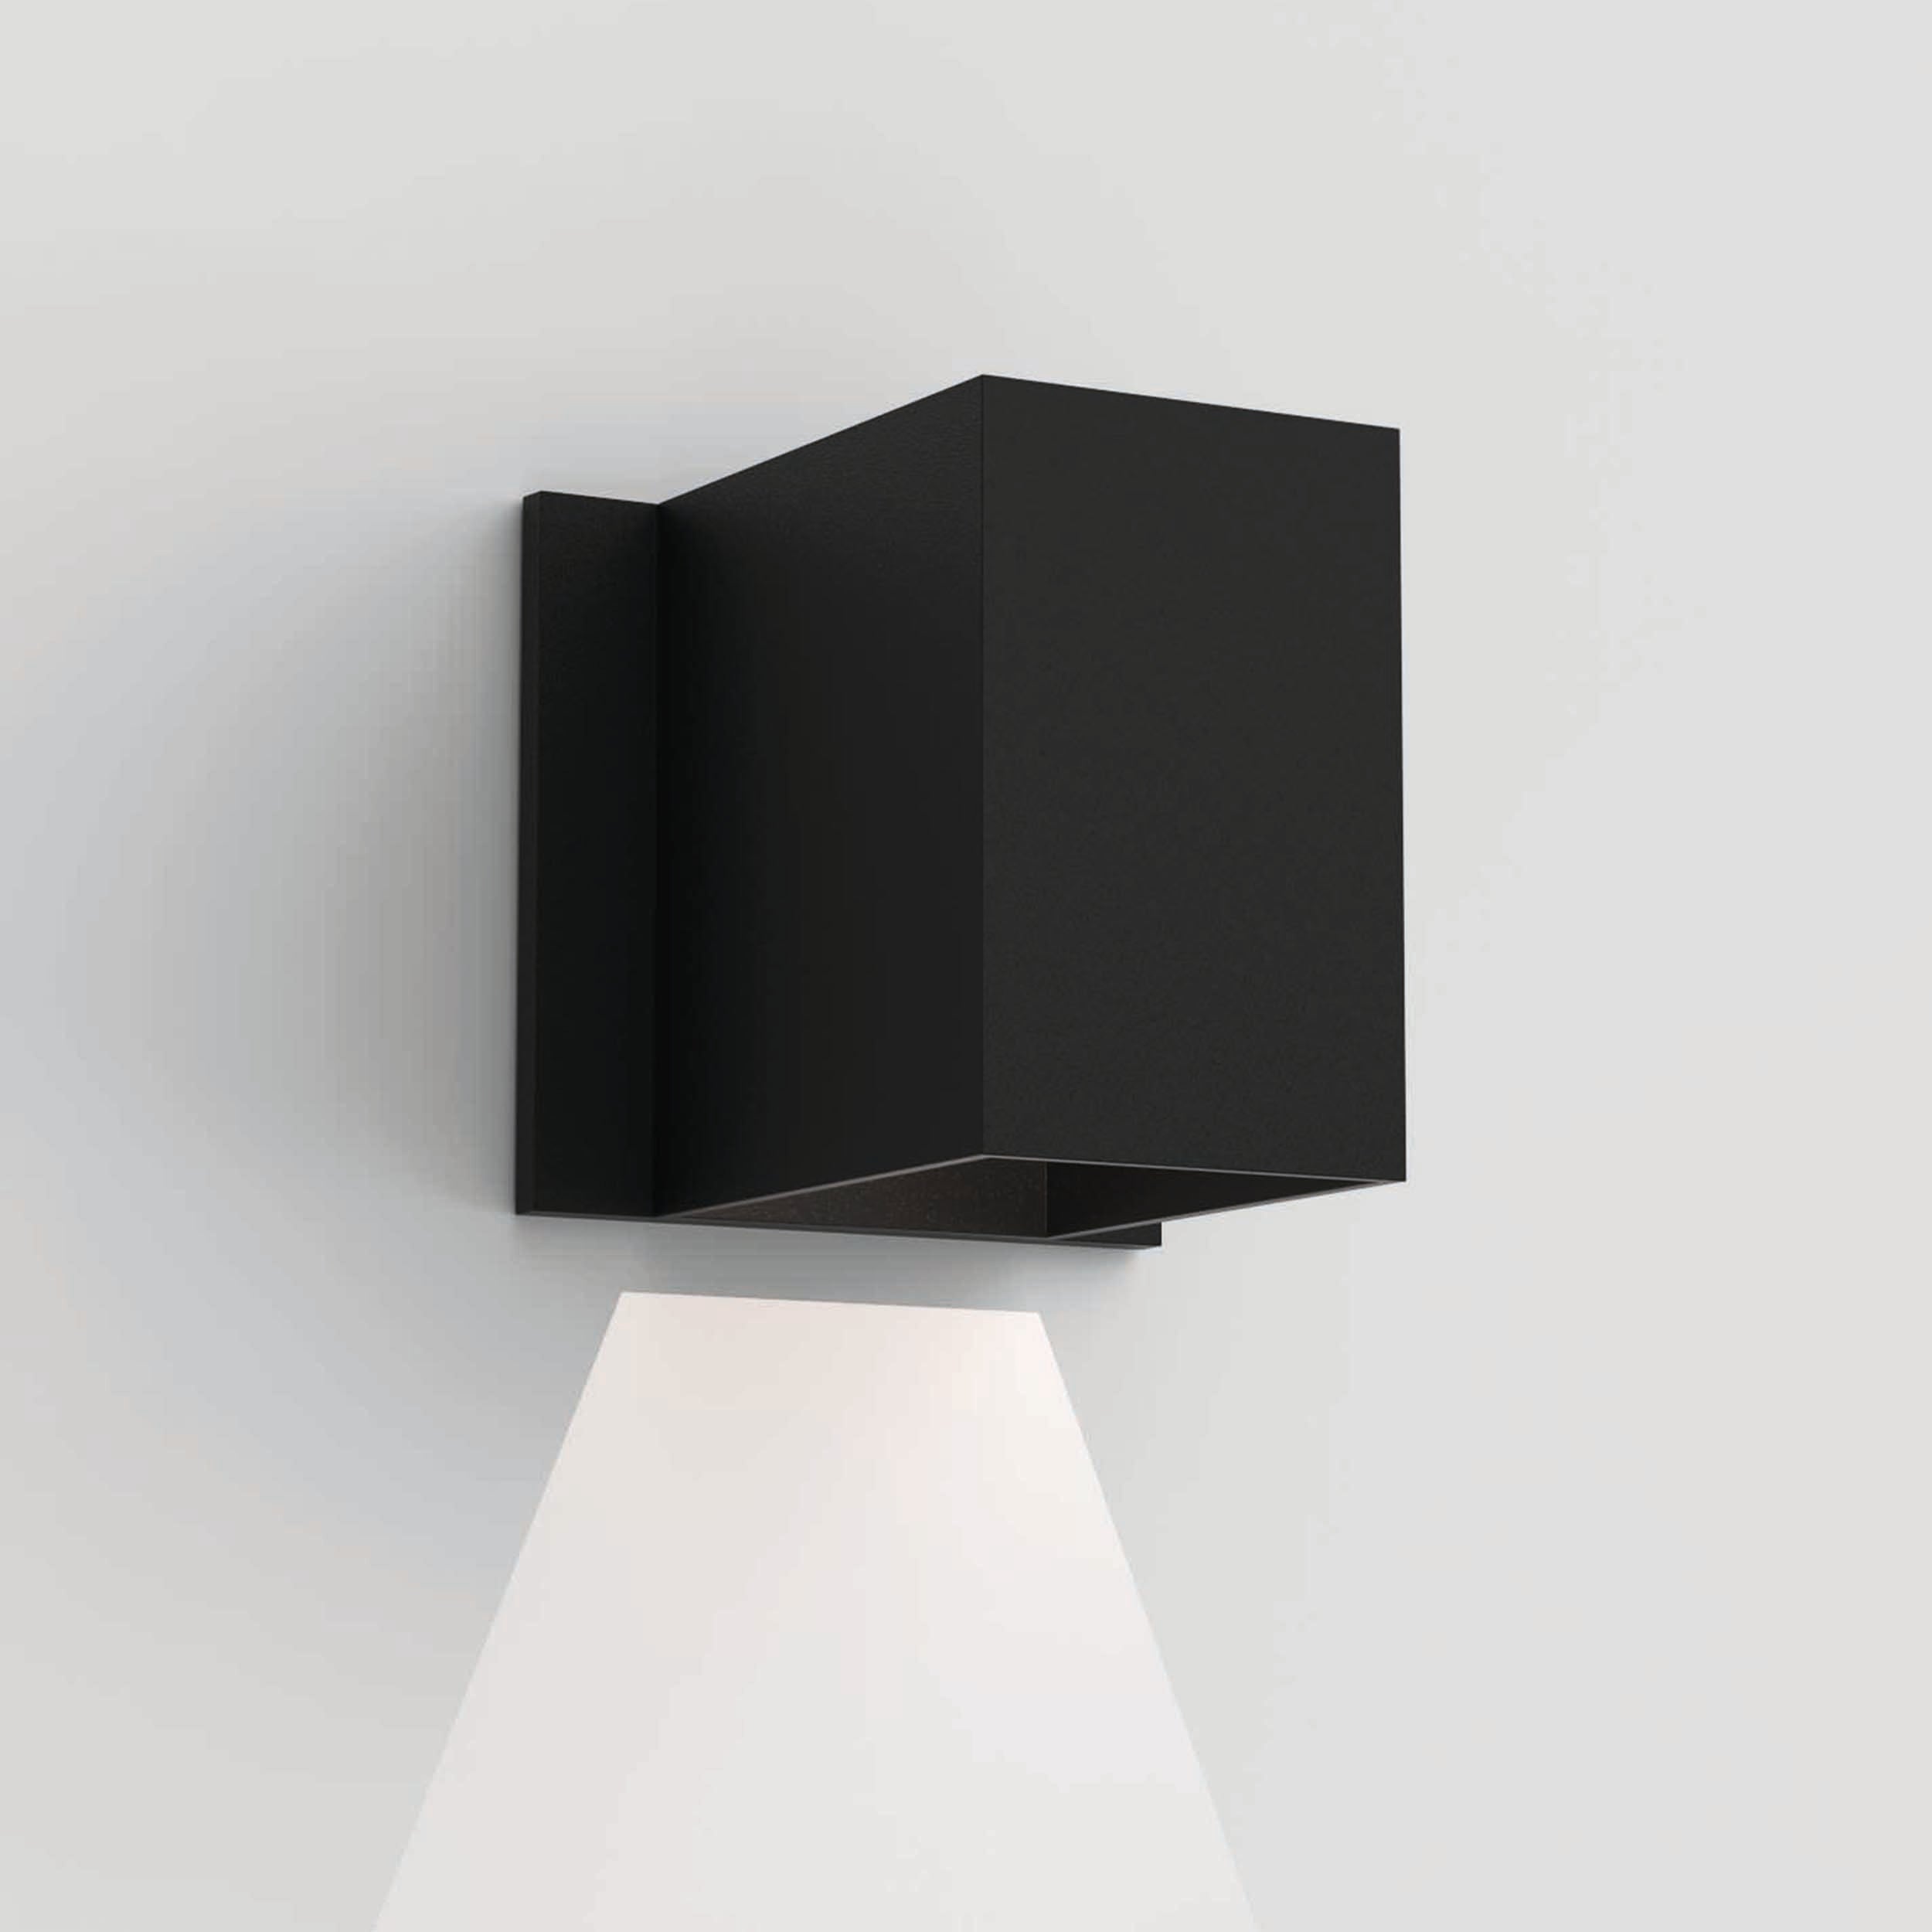 Astro Lighting Oslo Wall Light Fixtures Astro Lighting 4.17x4.33x4.33 Textured Black Yes (Integral), High Power LED